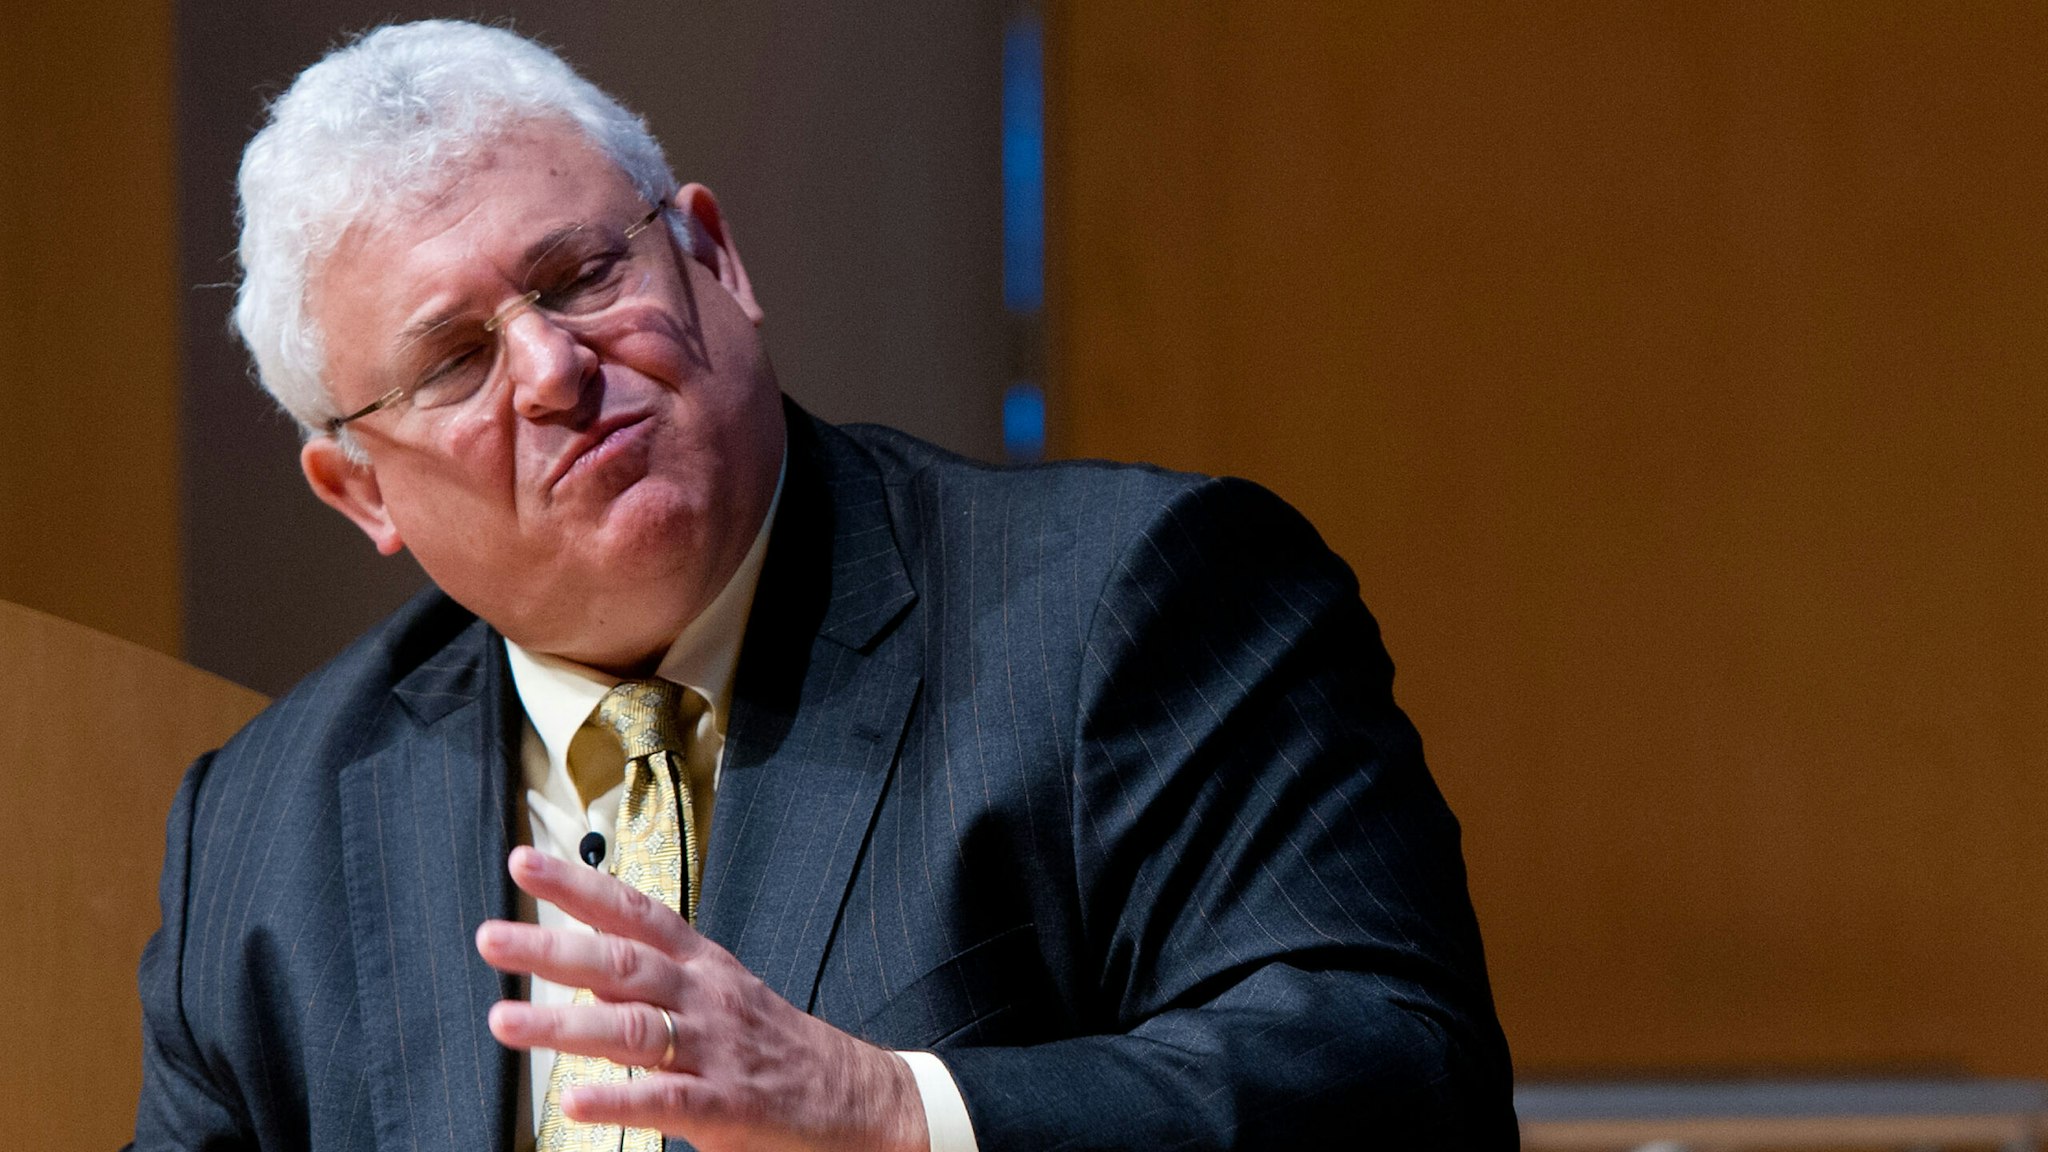 PHILADELPHIA, PA - SEPTEMBER 13: Dr. Arthur Caplan takes part in a panel discussion prior to the 2012 Liberty Medal Ceremony at the National Constitution Center on September 13, 2012 in Philadelphia, Pennsylvania.